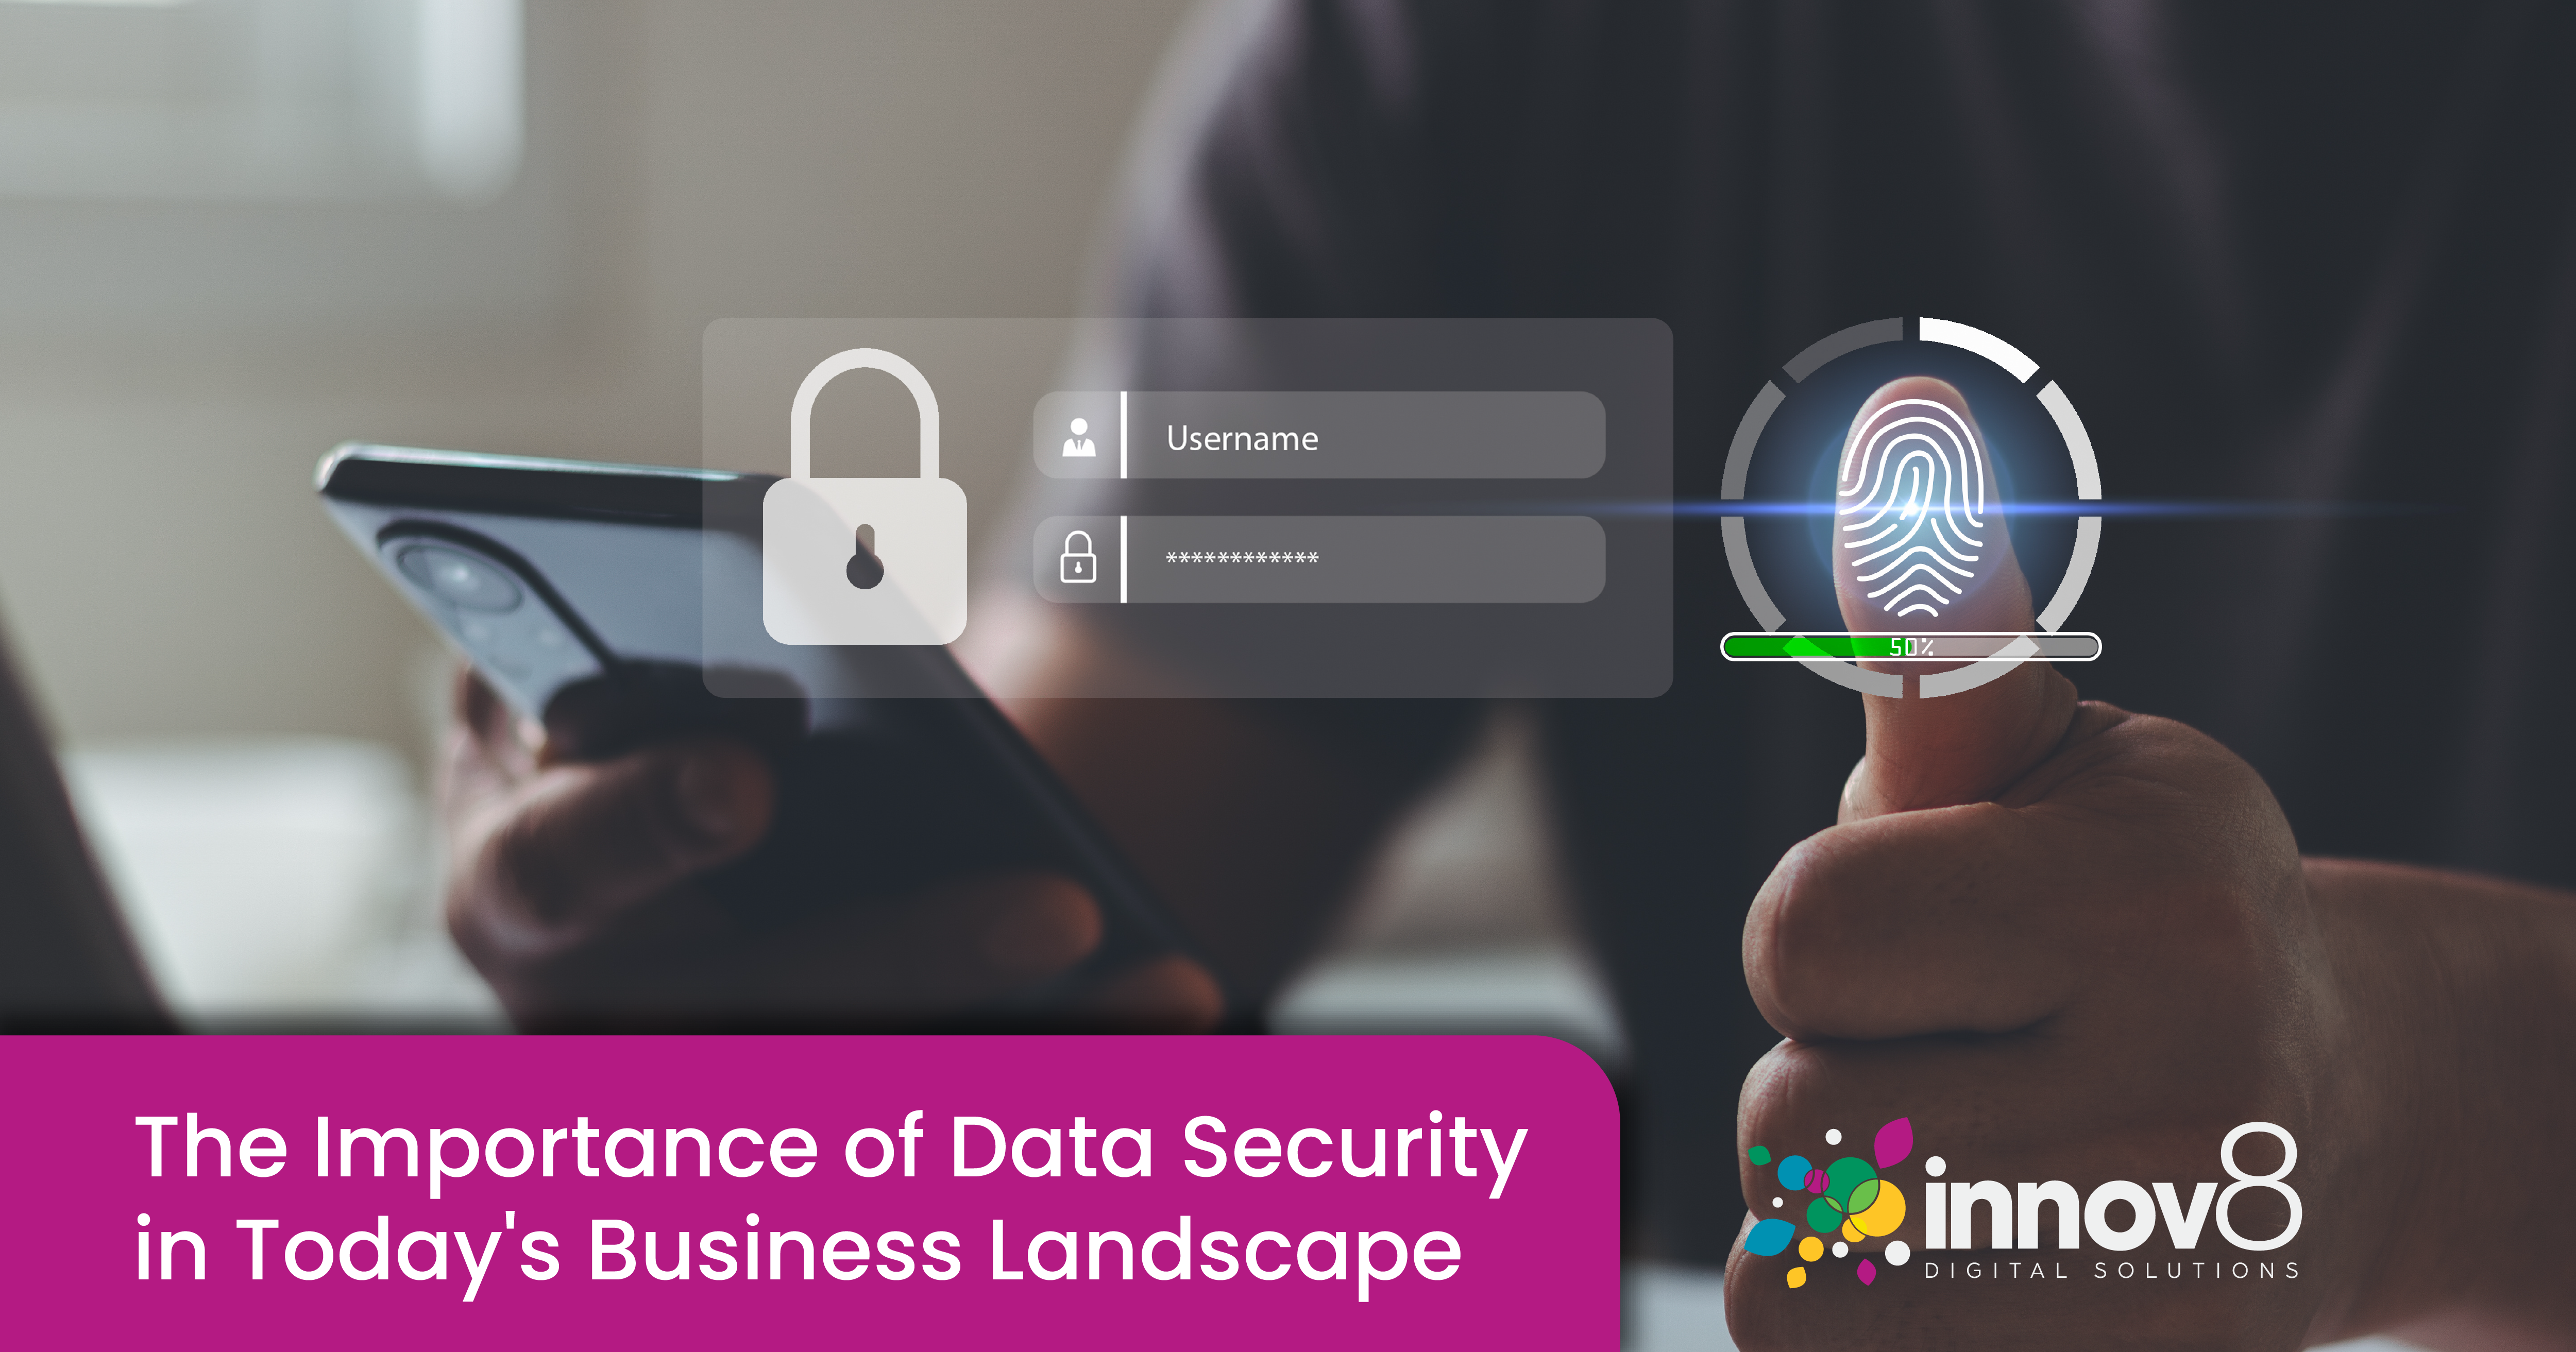 The Importance of Data Security in Today's Business Landscape: Insights from innov8